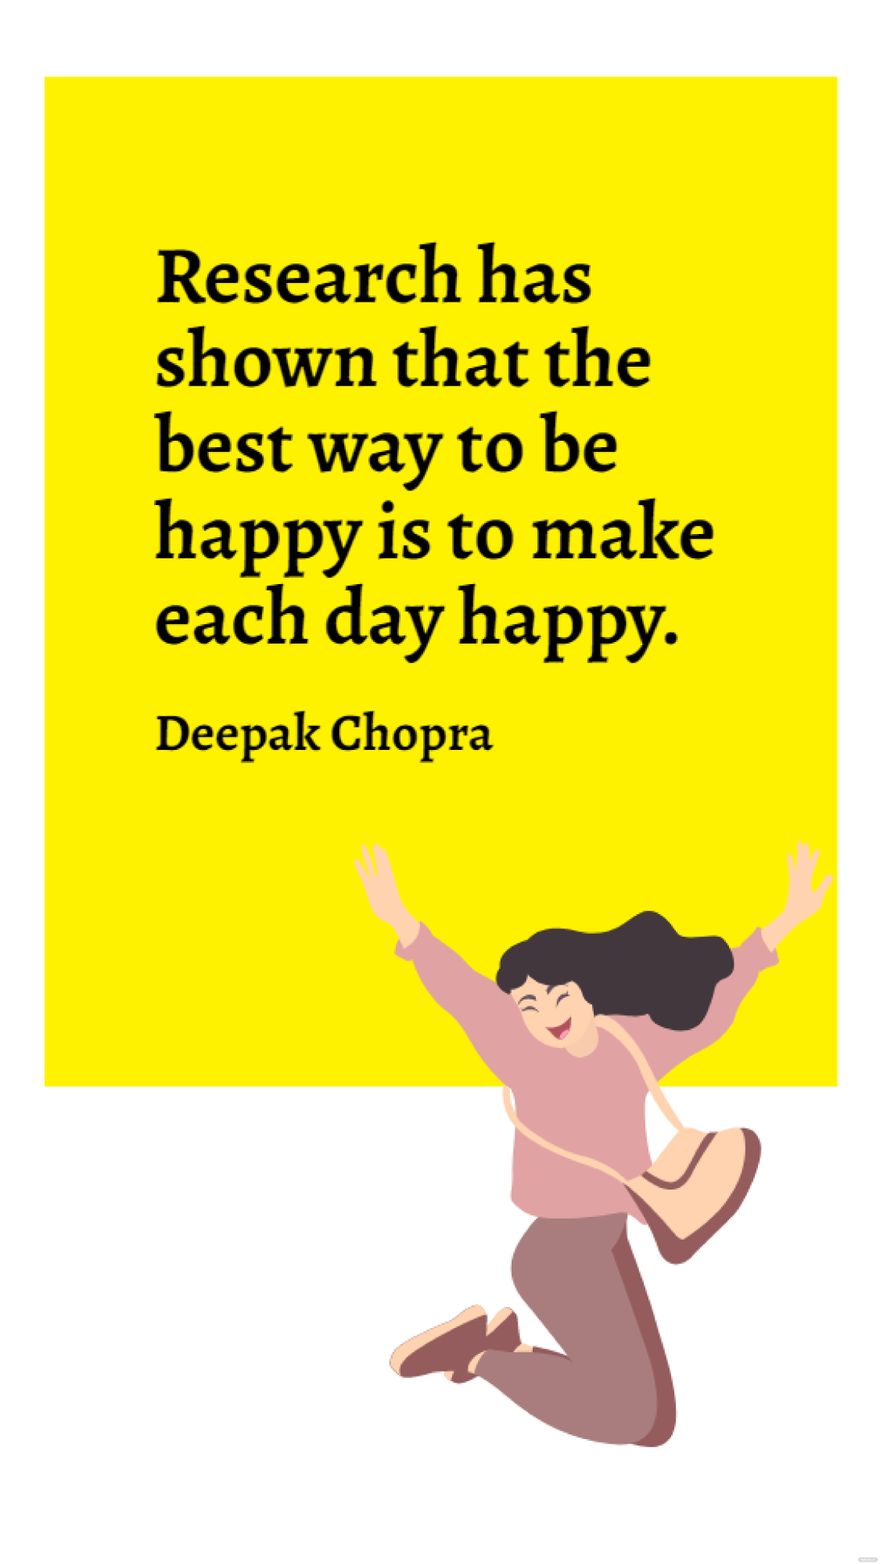 Deepak Chopra - Research has shown that the best way to be happy is to make each day happy.